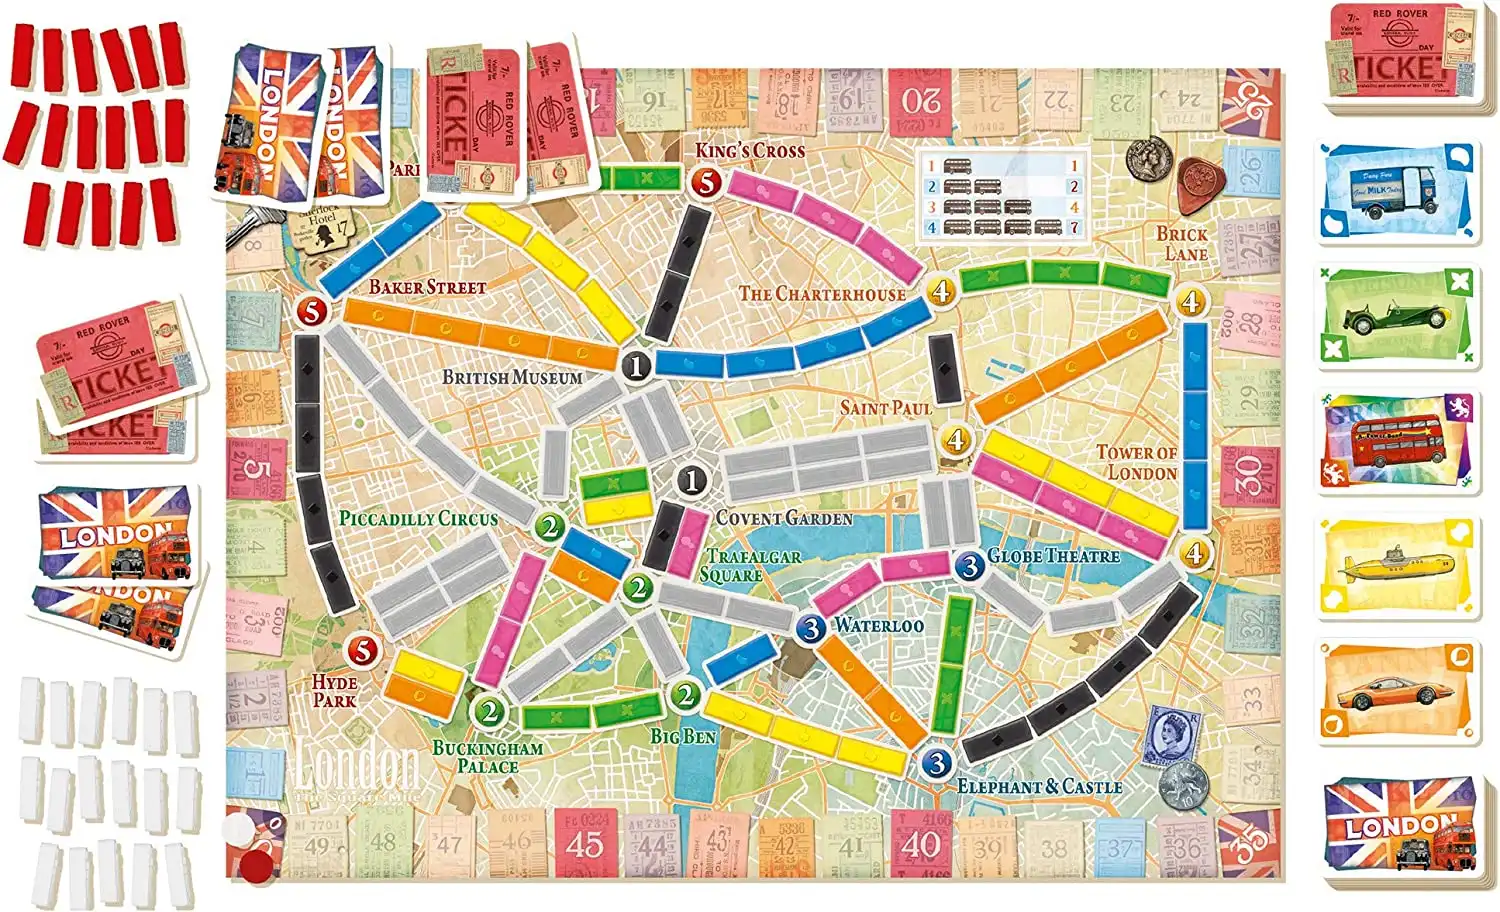 Ticket to Ride: London (2019)